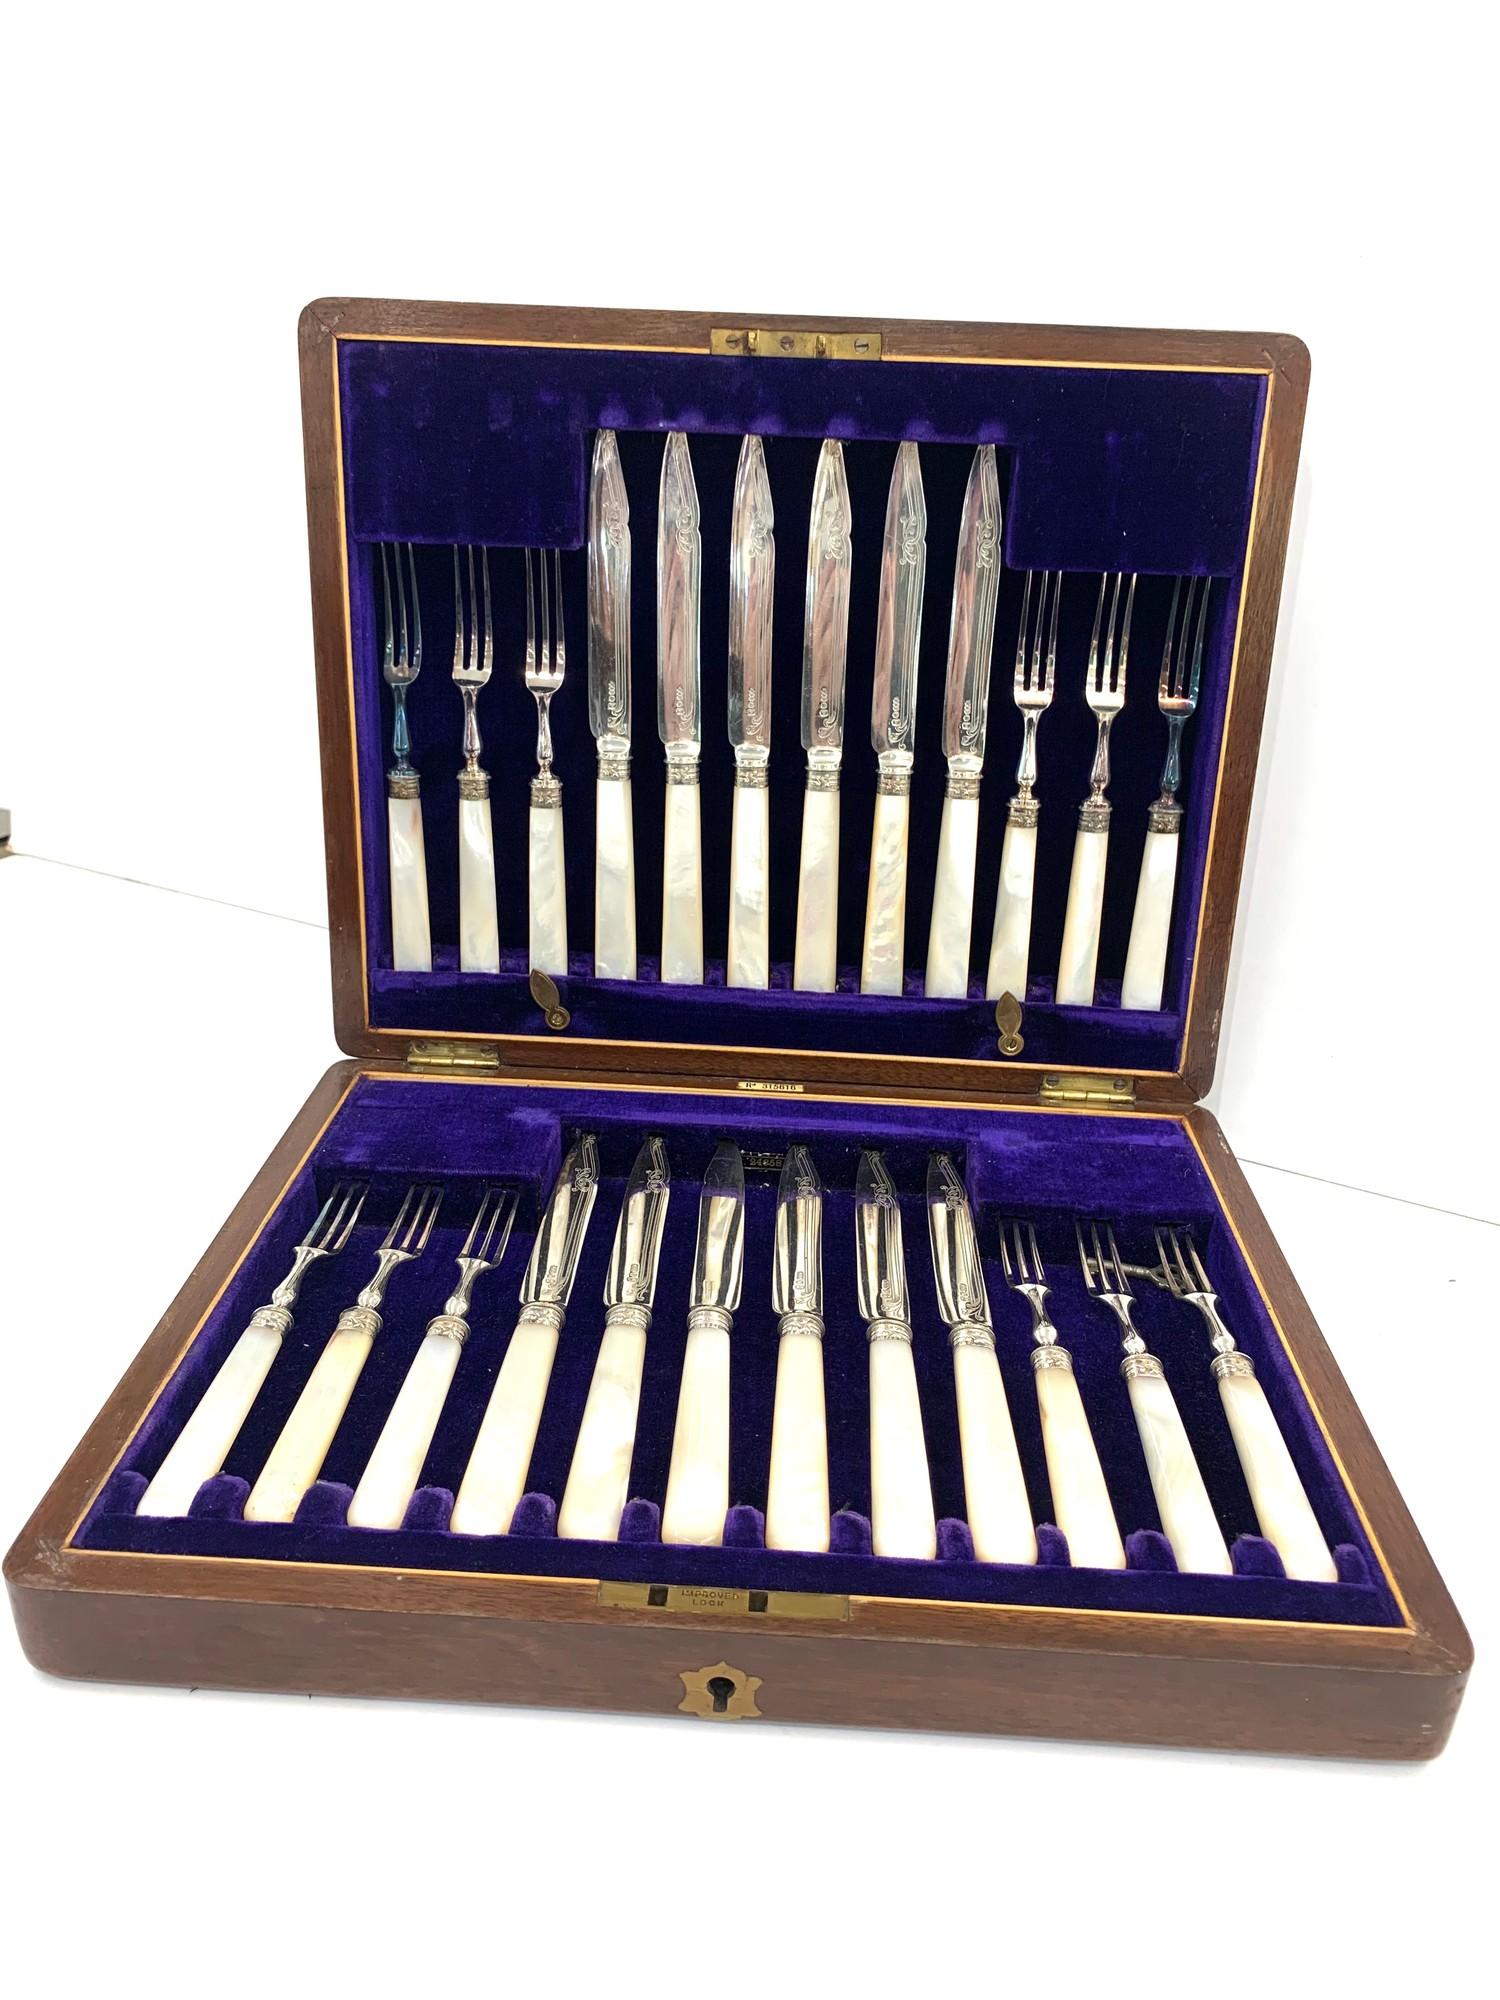 Boxed antique mother of pearl handle 12 setting fish knives and forks in good original condition